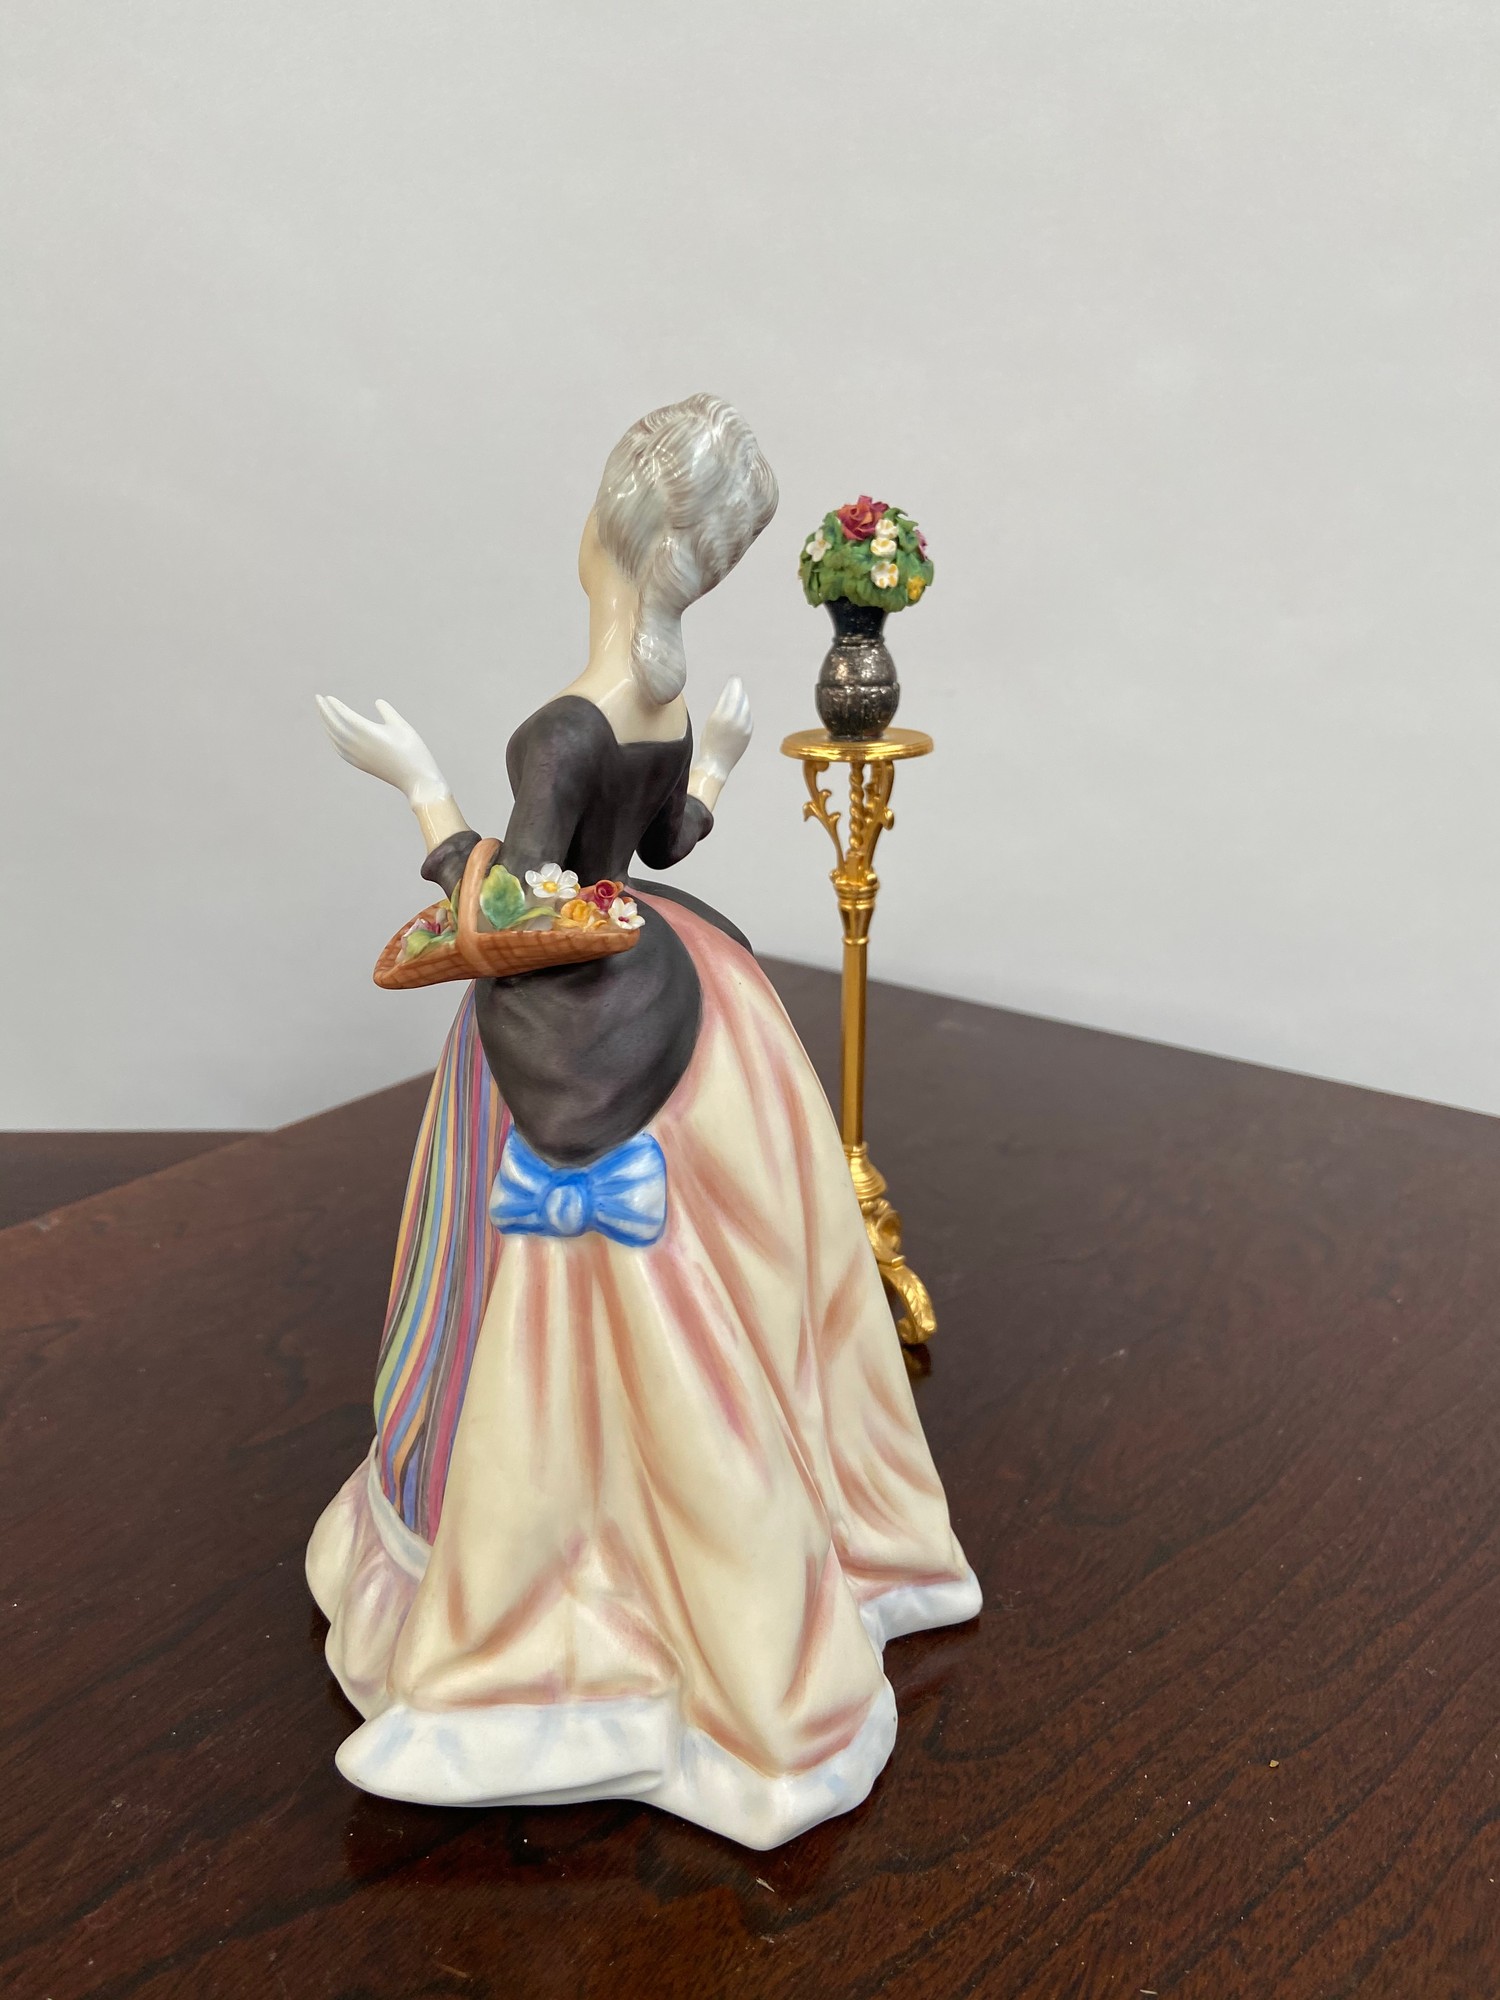 A Royal Doulton Figurine, The gentle arts, Flower Arranging, 542 of 750. - Image 3 of 4